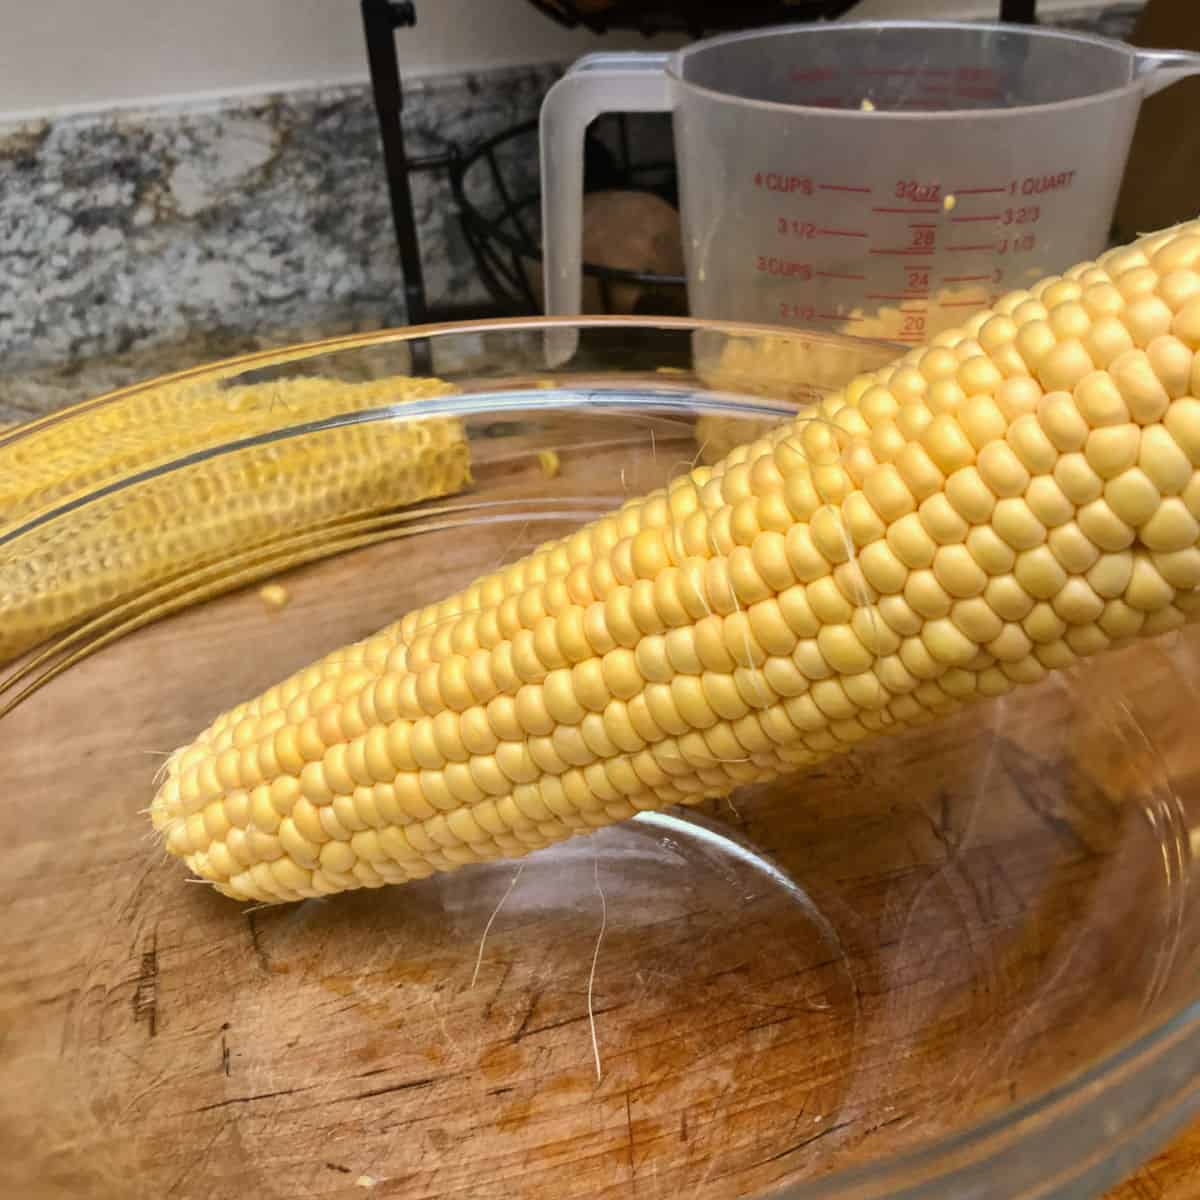 An ear of corn in a glass bowl.